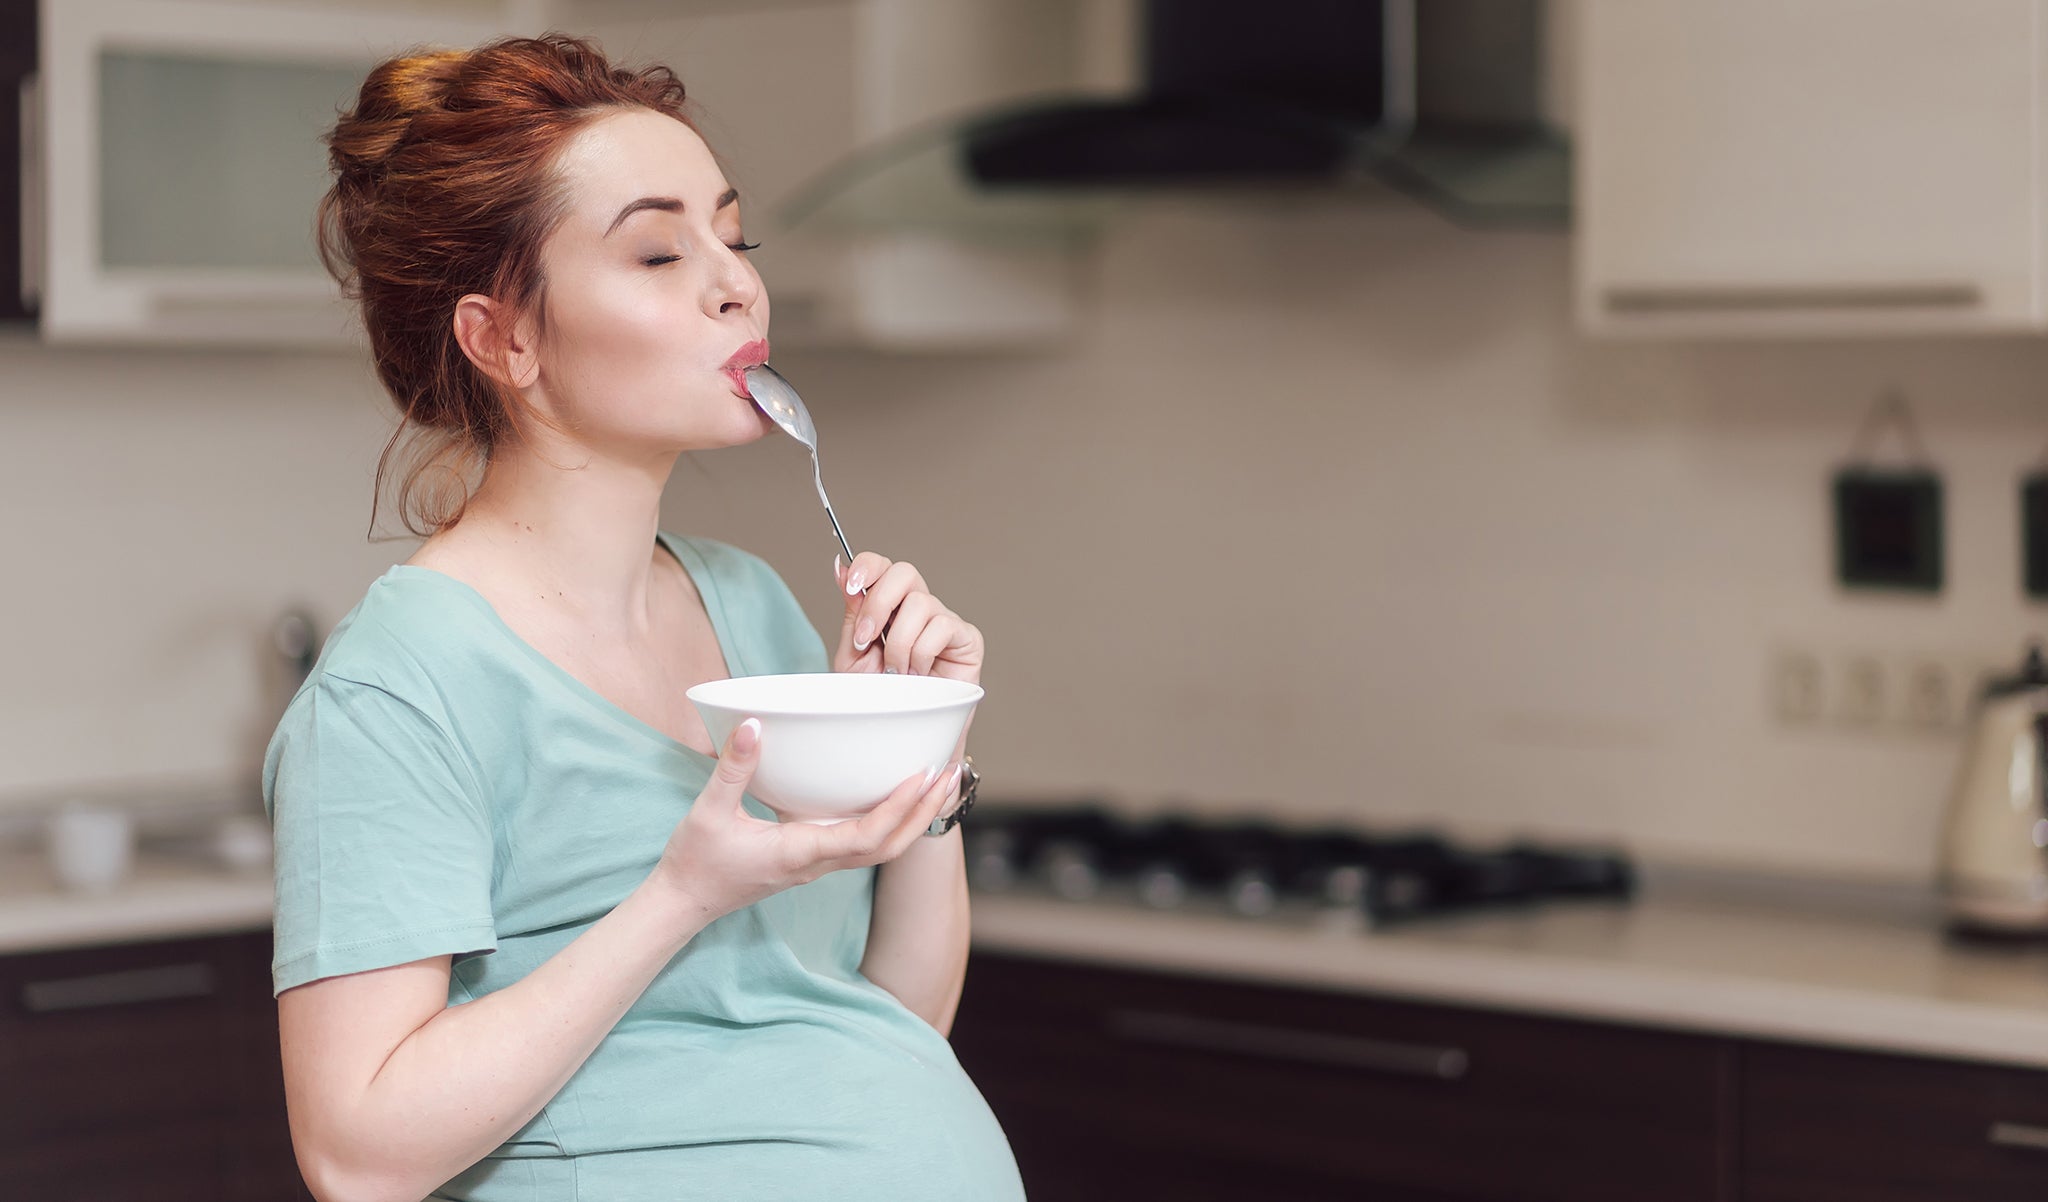 Pregnant female woman with light green shirt eating cereal in kitchen